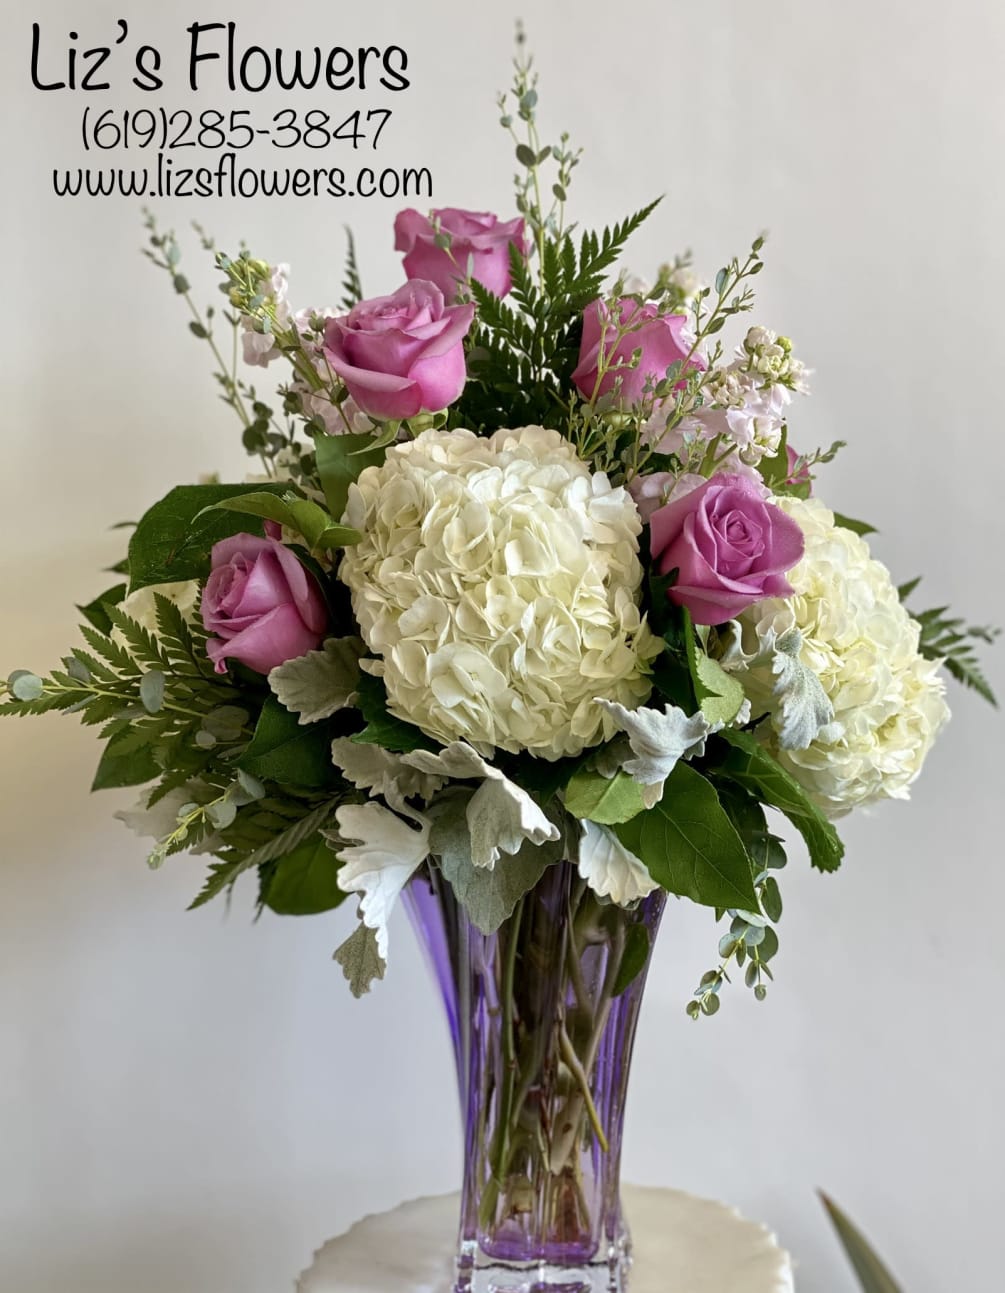 Lavender Roses, Lavender/White Stock and White Hydrangea are very elegant In this